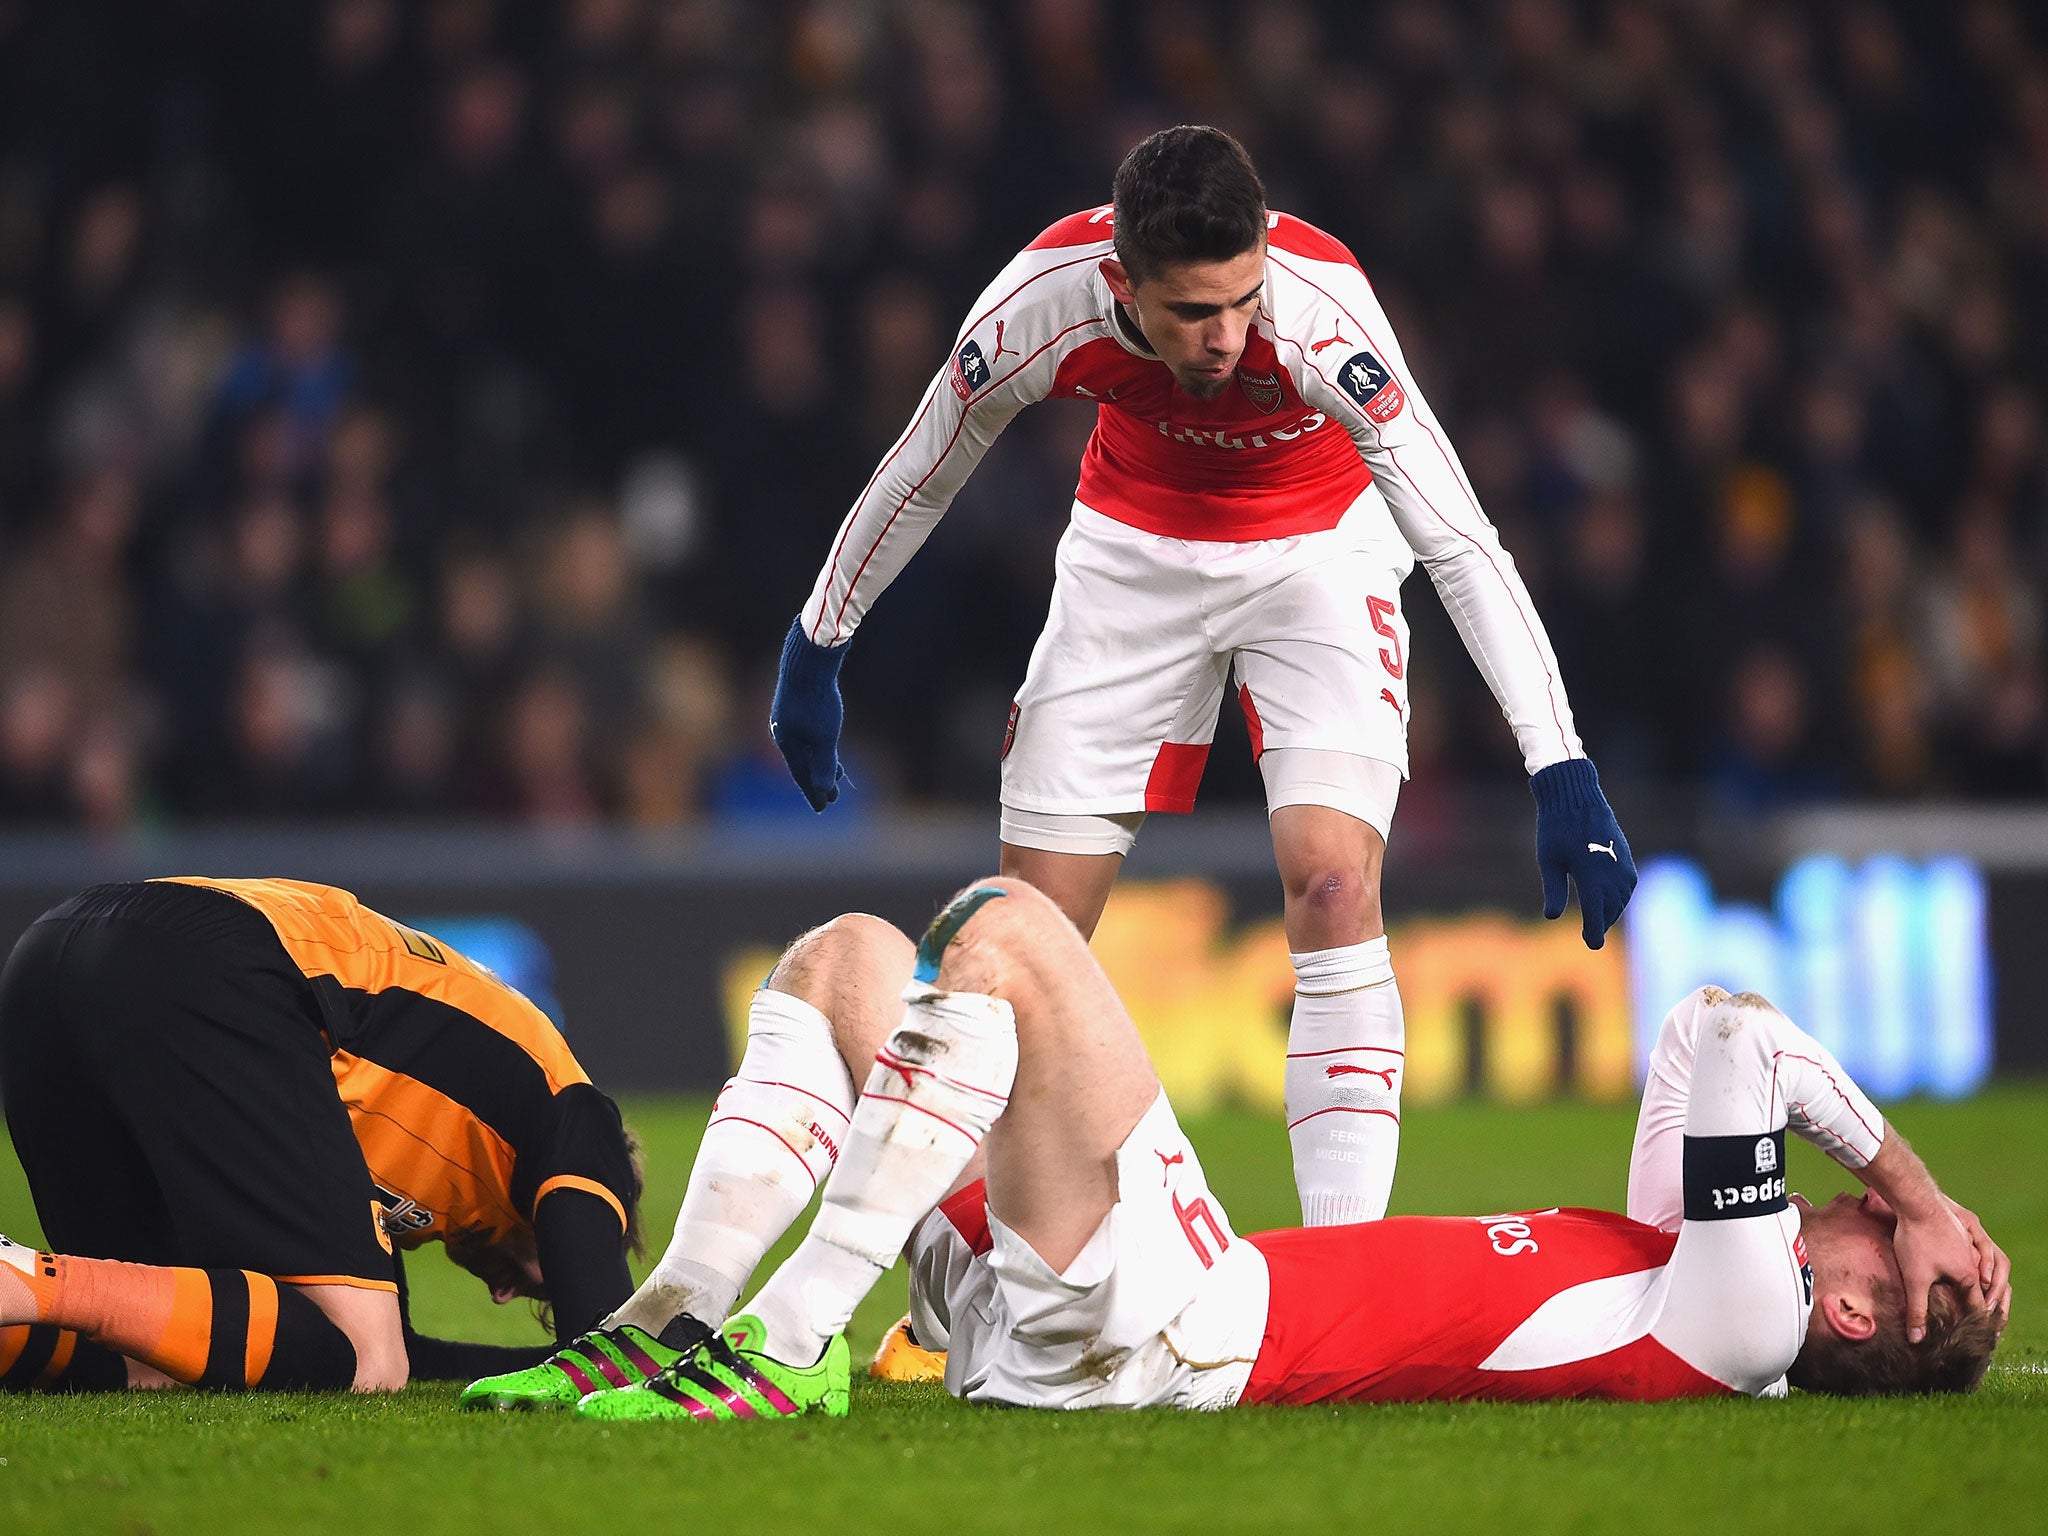 Per Mertesacker suffered a cut and a small concussion after a head clash with Nick Powell